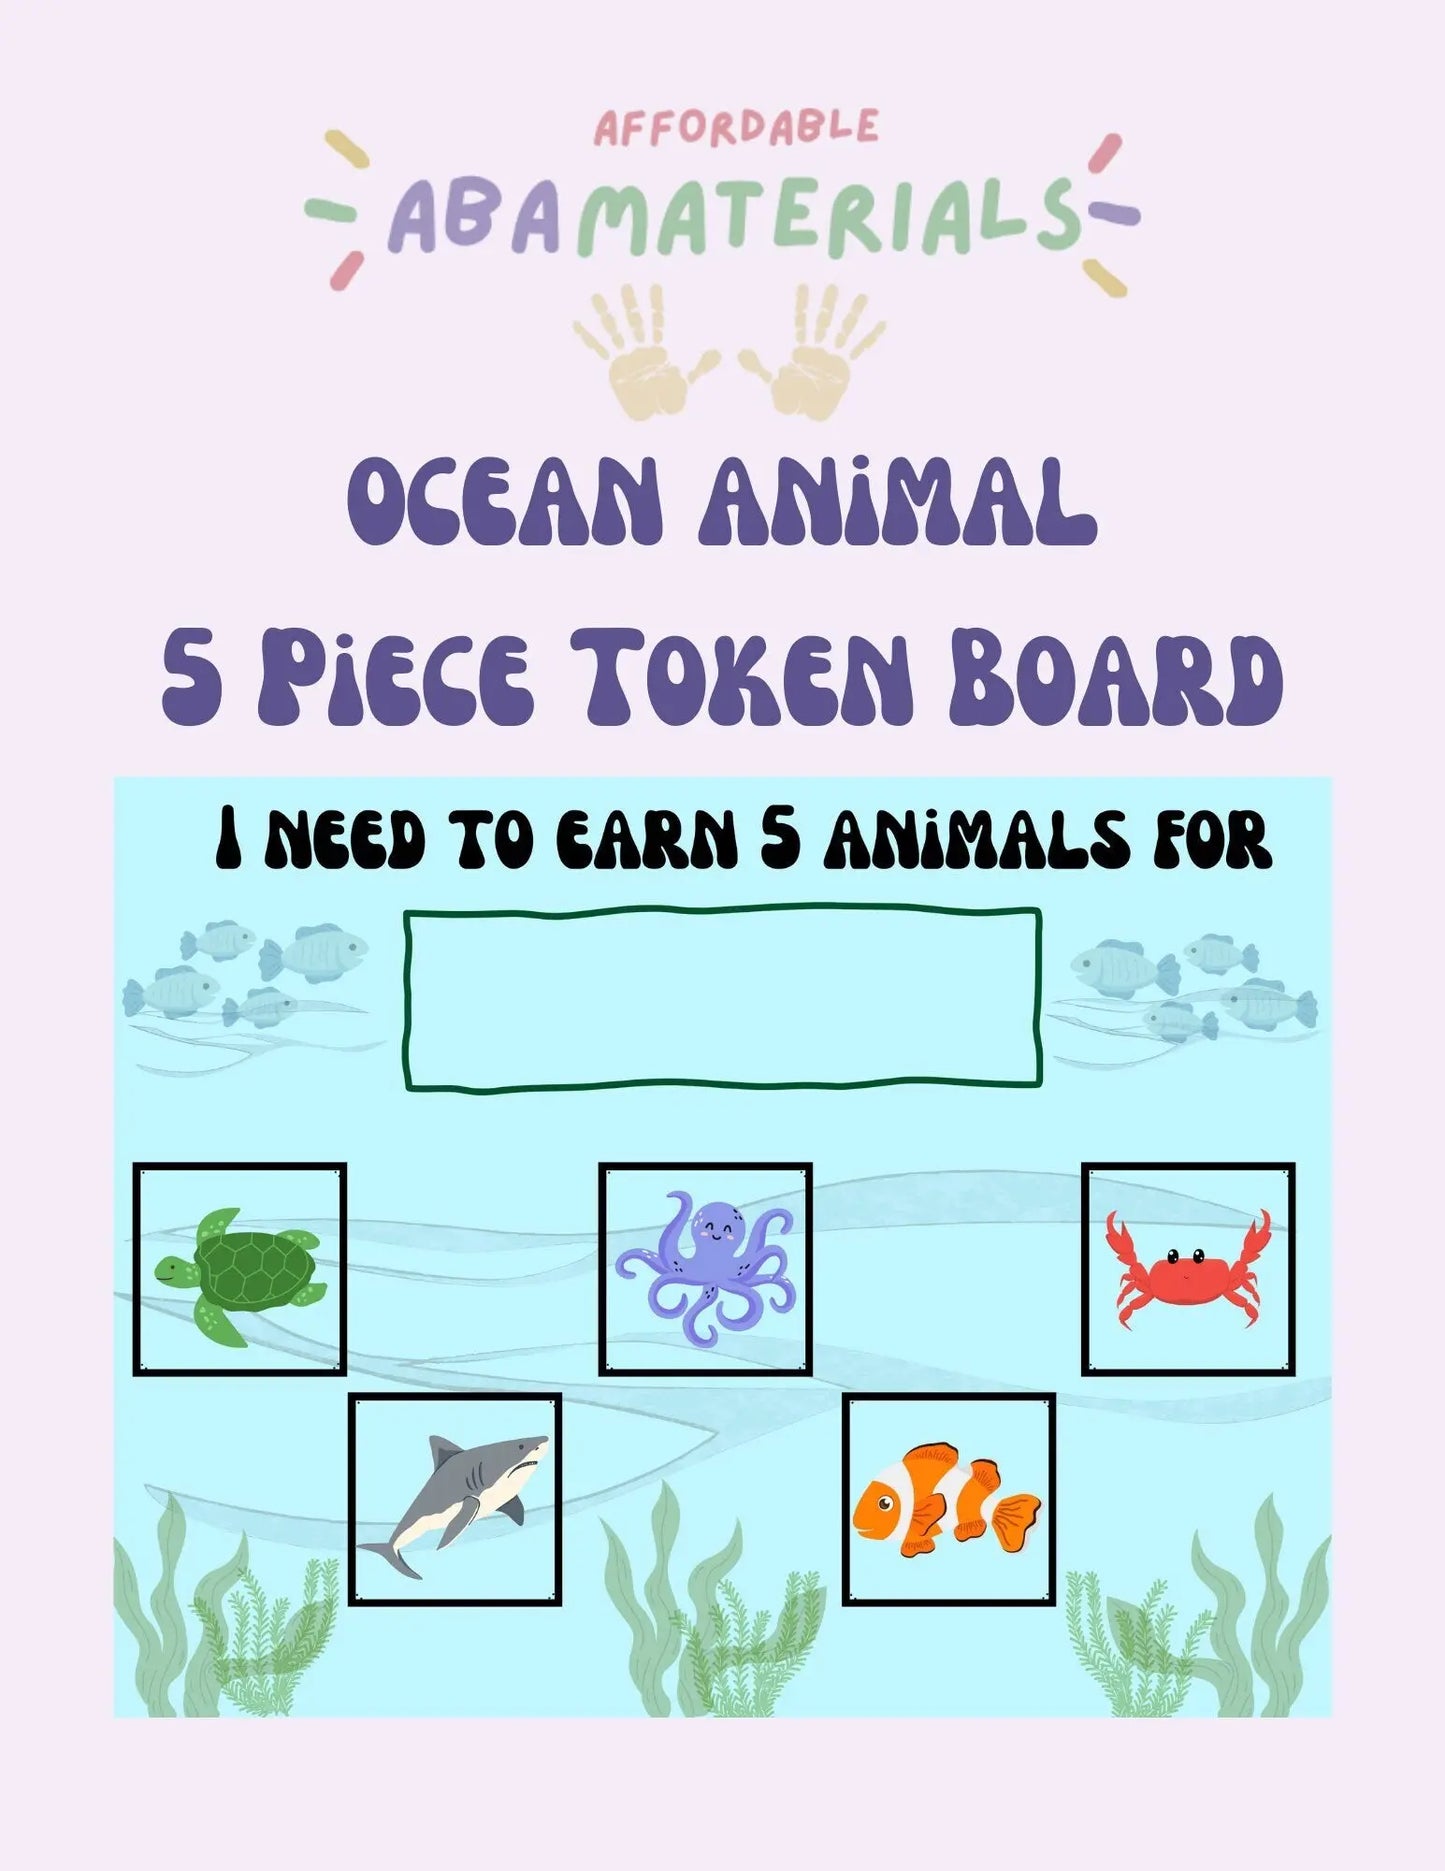 Ocean Animal Themed Token Board - Printable Fun and Functional Behavior Reward System 5 pc Token Economy "I'm Working for" Board My Store